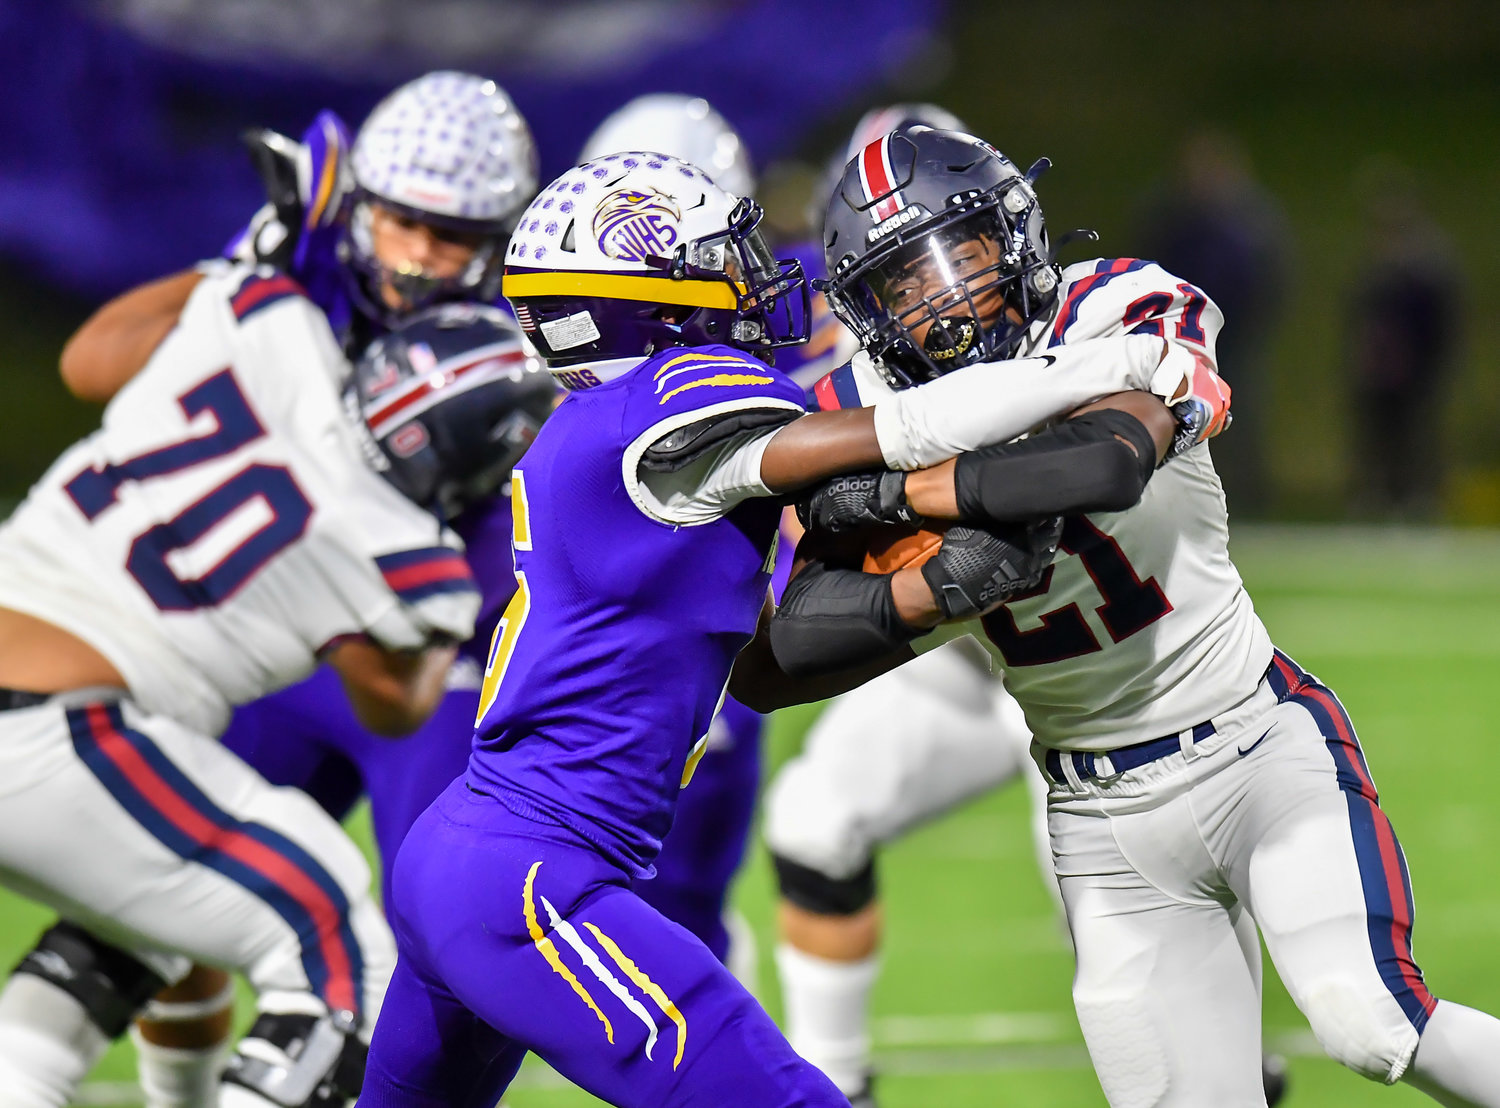 Houston Tx. Nov 19, 2021: Tompkins #21 Caleb Blocker rushes to the outside during the UIL area playoff game between Tompkins and Jersey Village at Pridgeon Stadium in Houston. (Photo by Mark Goodman / Katy Times)